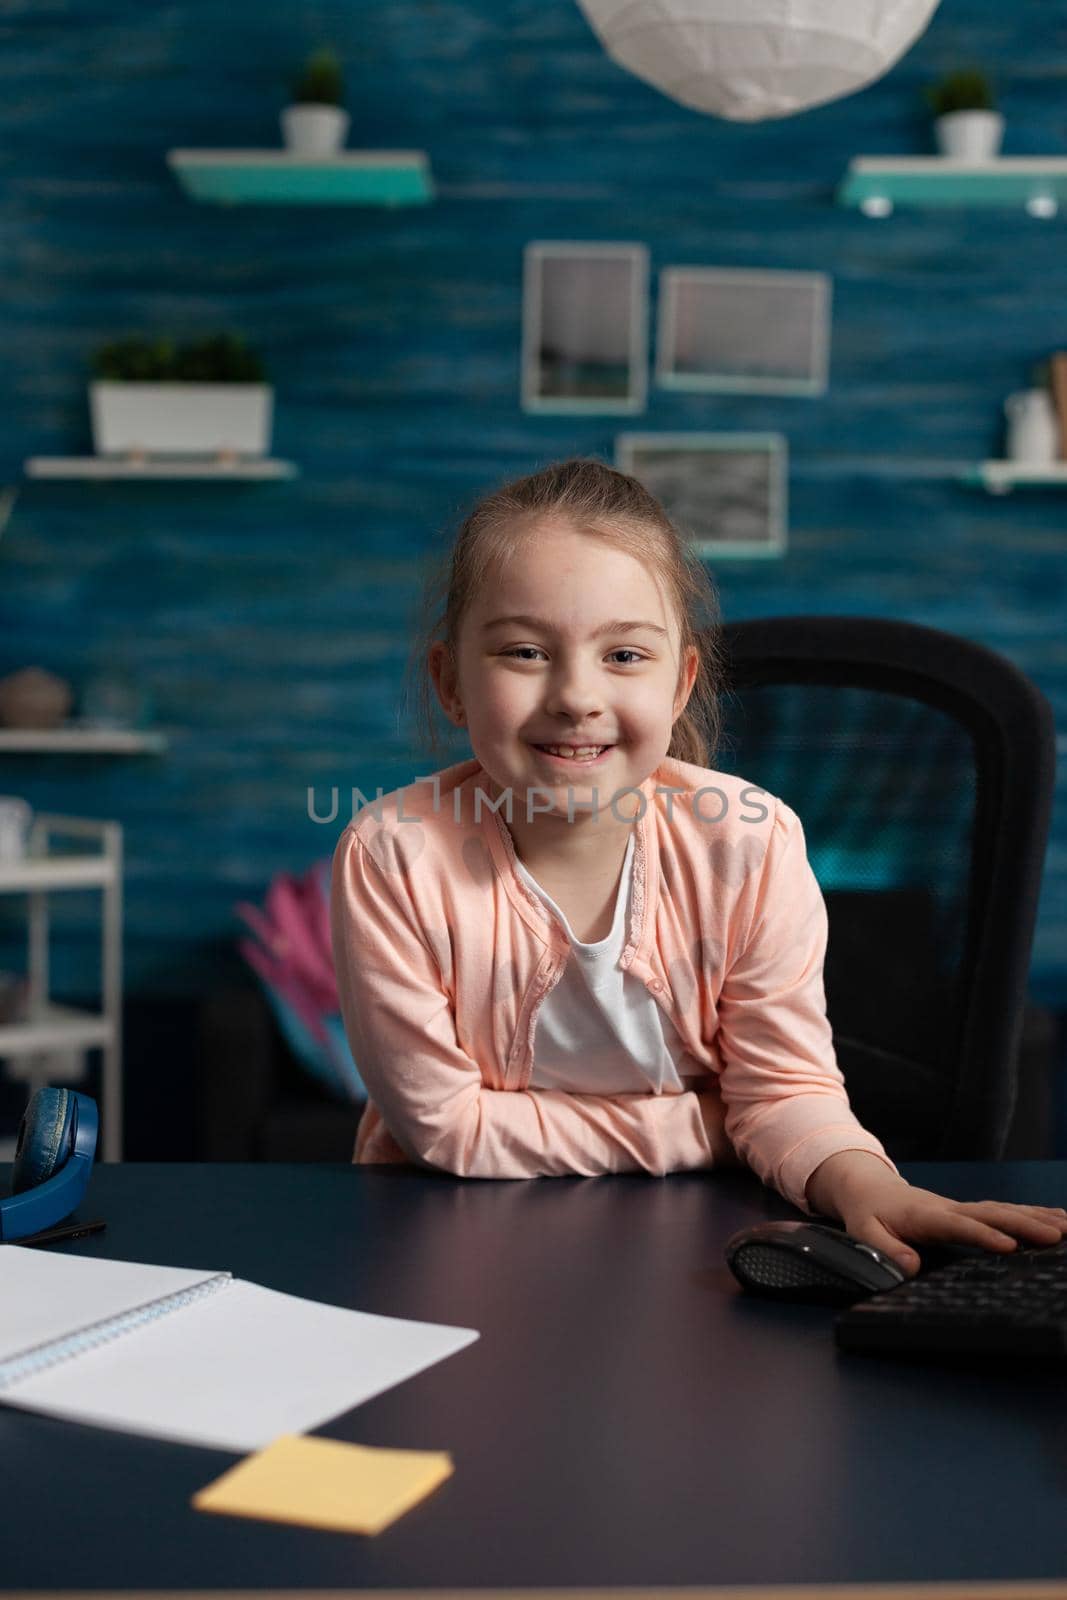 Joyful little girl smiling sitting at desk for online school work on internet classroom lecture. Clever child with educational supplies notebook pen preparing for communication meeting